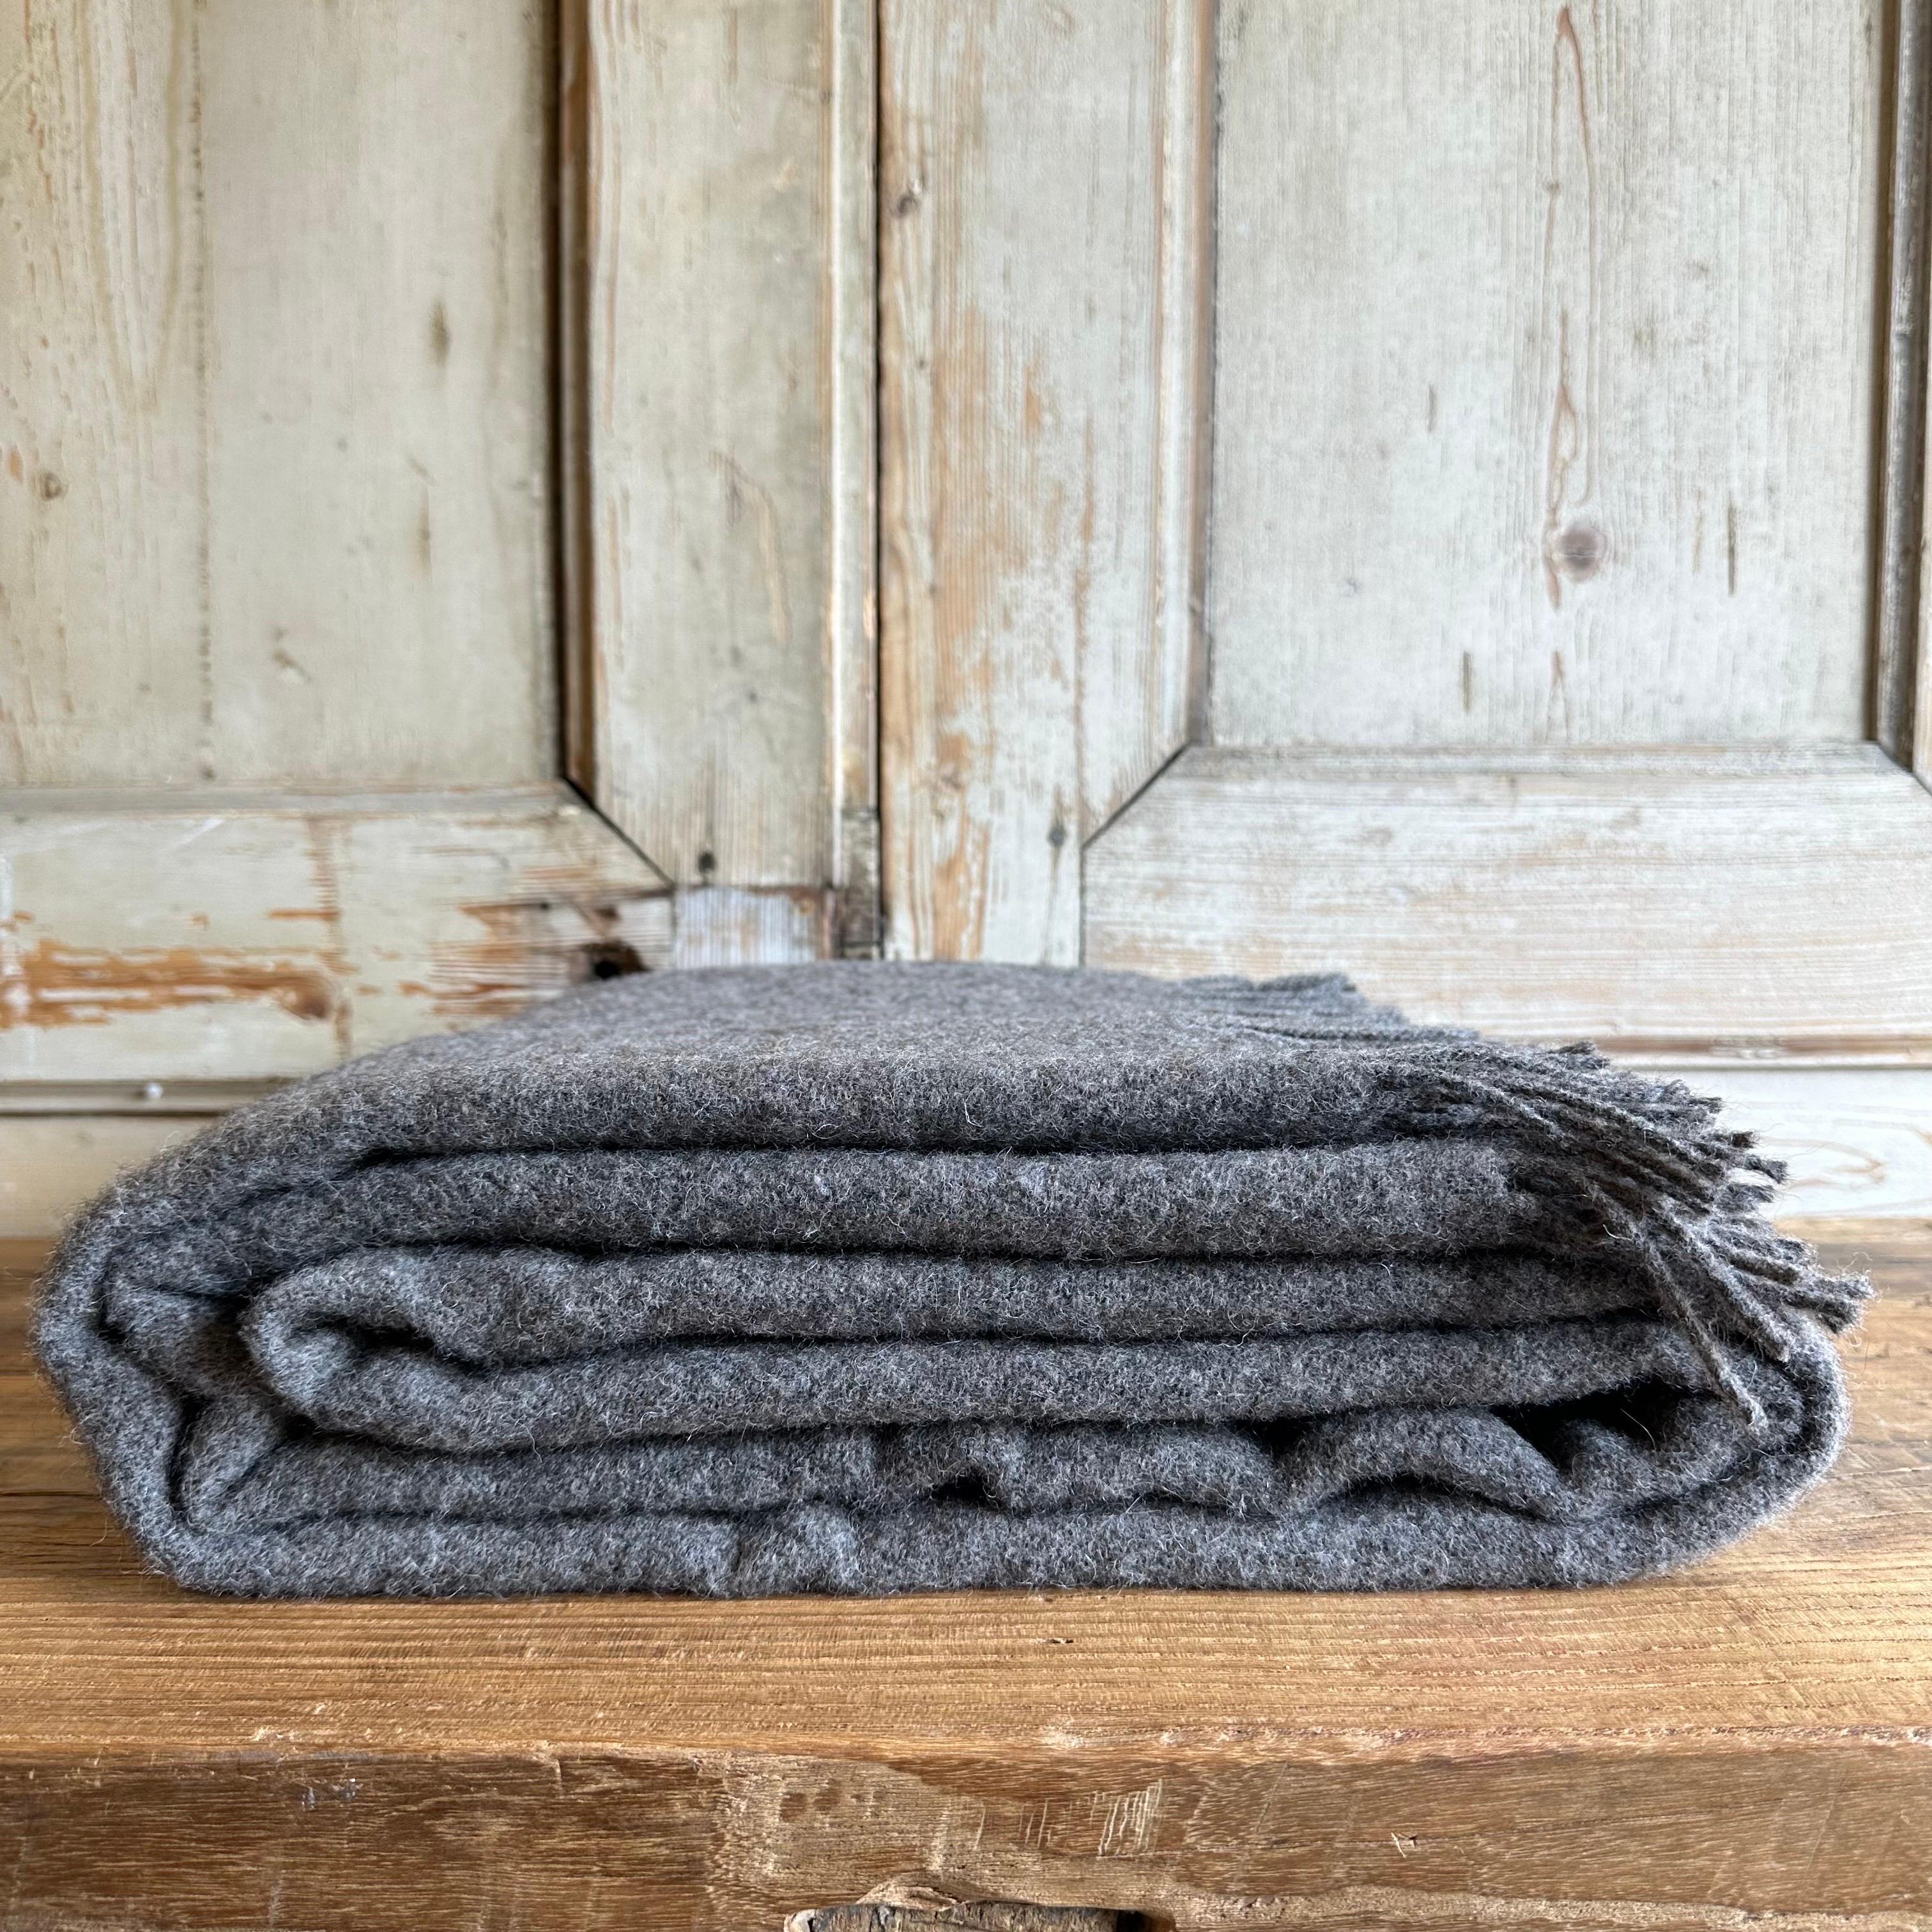 Fall in love with our enchanting Mason throw made of alpaca wool and genuine sheepskin wool. The quality is 100% natural, which is why you will experience an extreme softness both in its looks and when you feel the beautiful throw. An exclusive